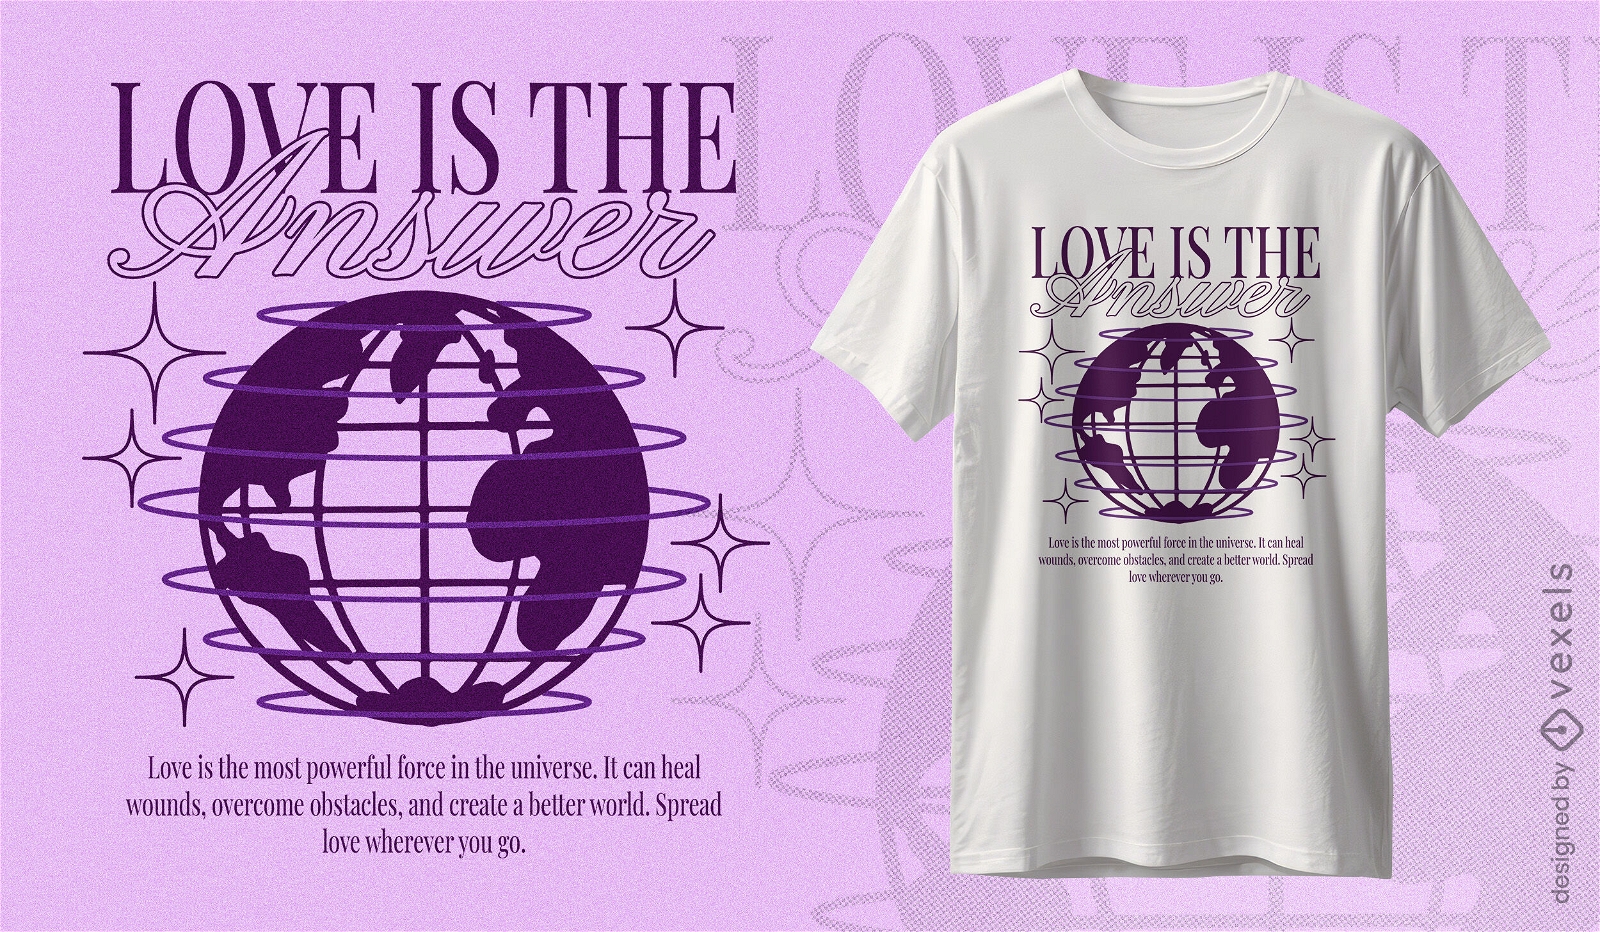 Global love quote t-shirt design